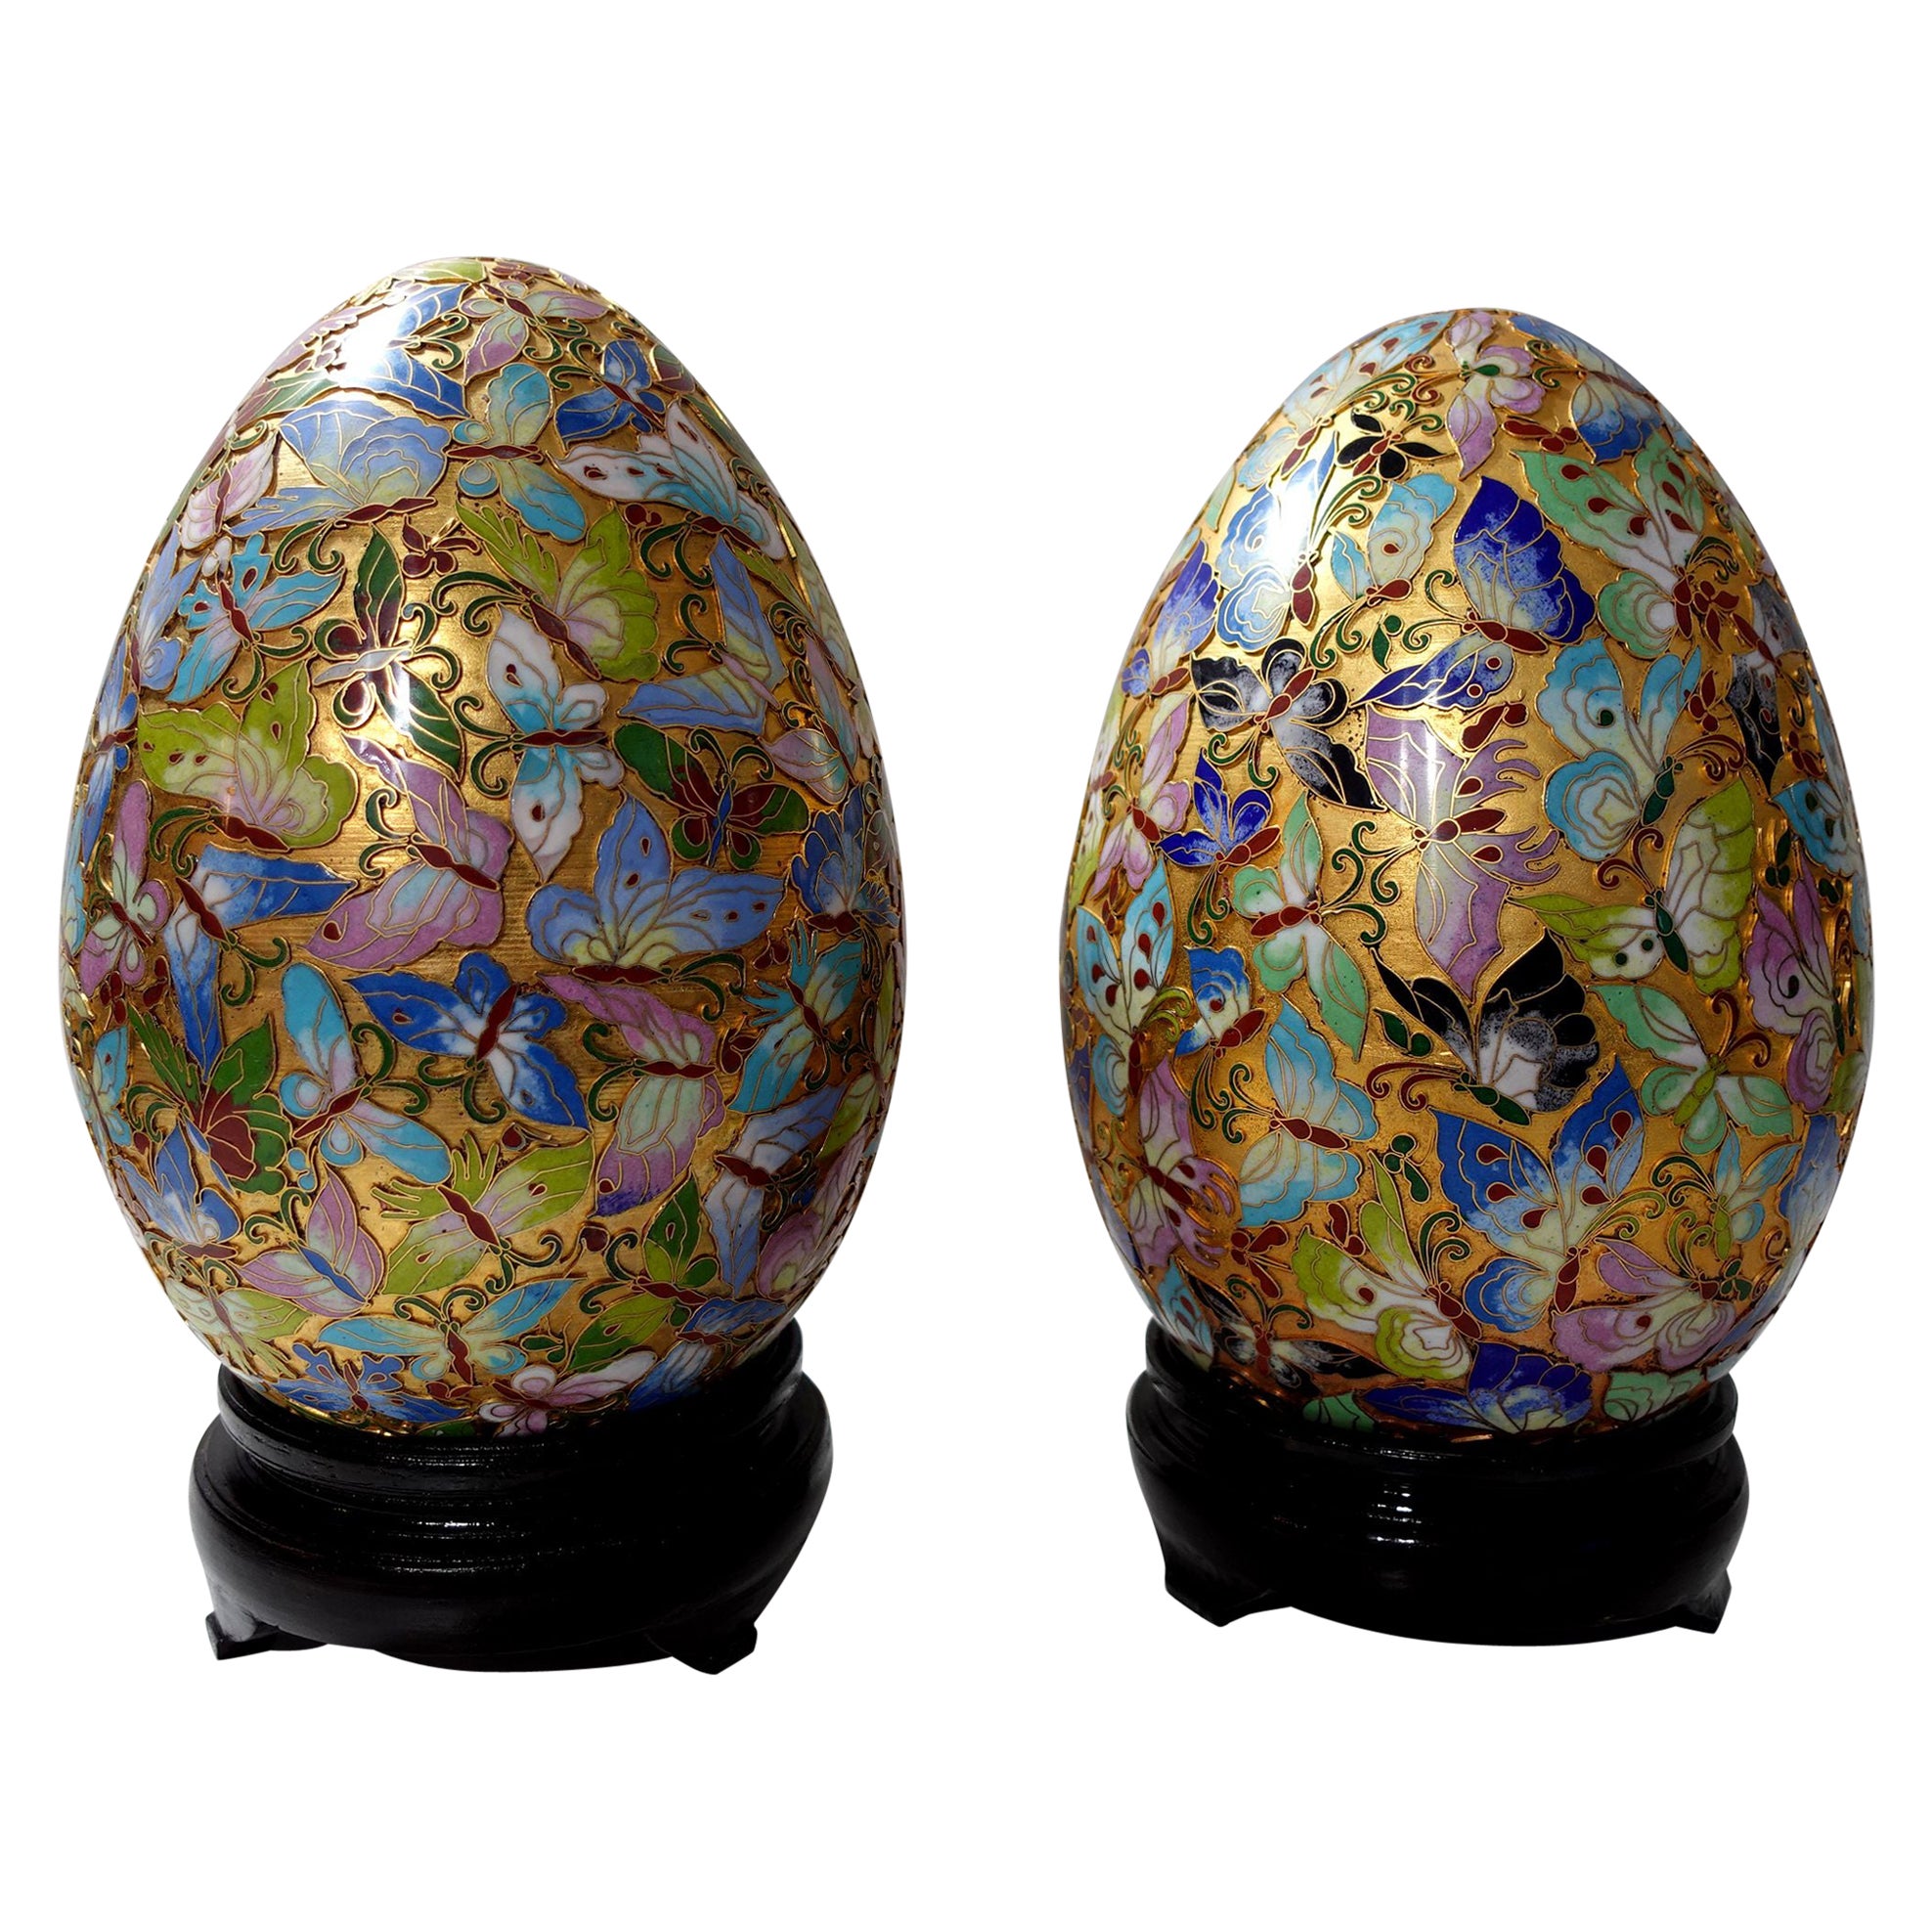 Chinese Huge Pair Cloisonné Enamel Eggs "Hundred Butterflies" with Wood Stands